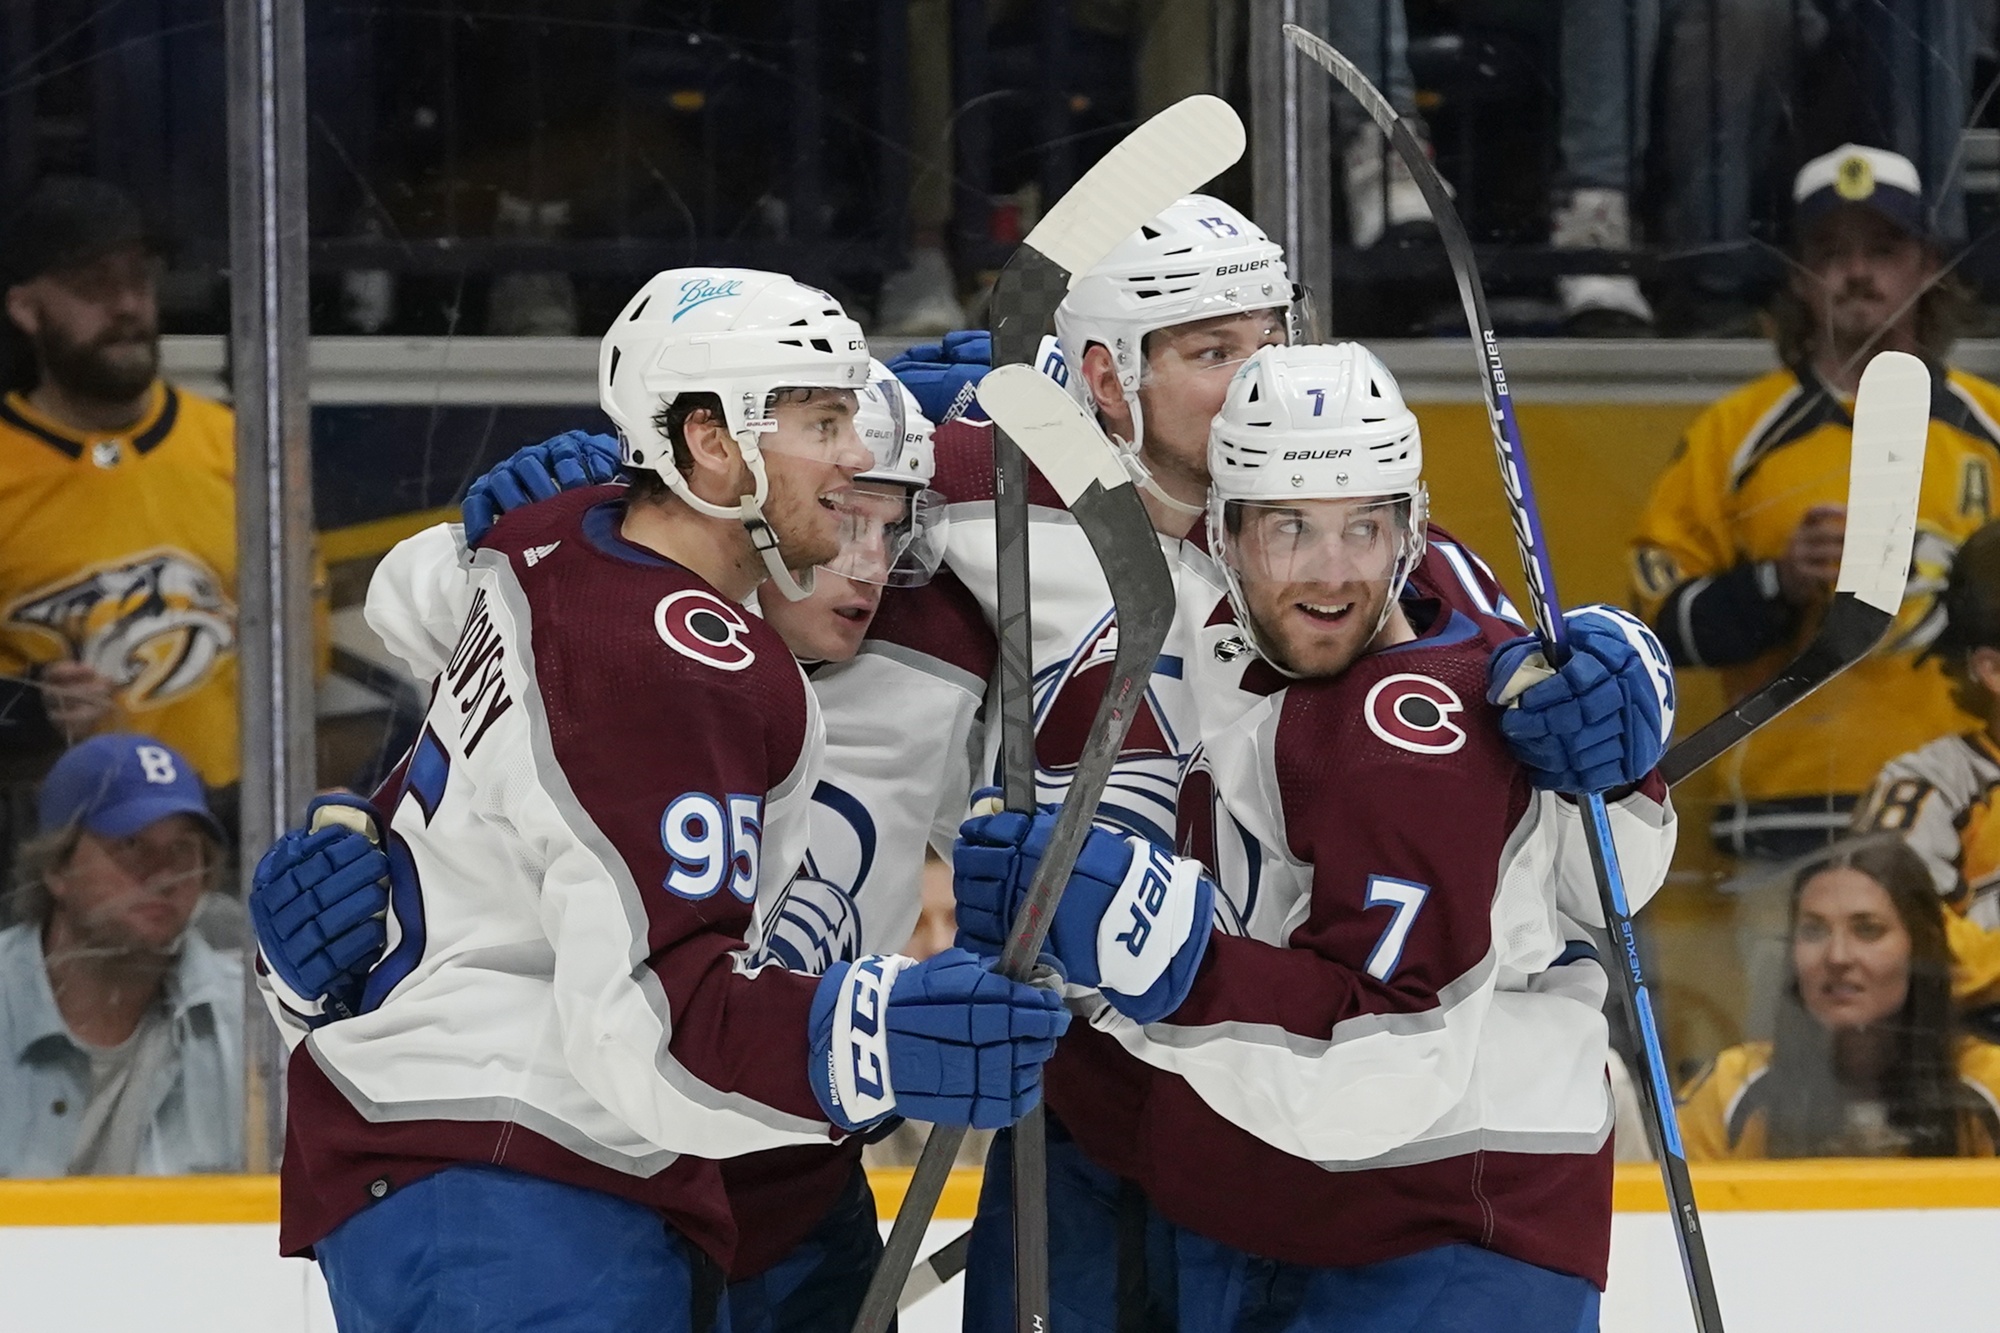 Love The Song? Here's The Colorado Avalanche Goal Song History